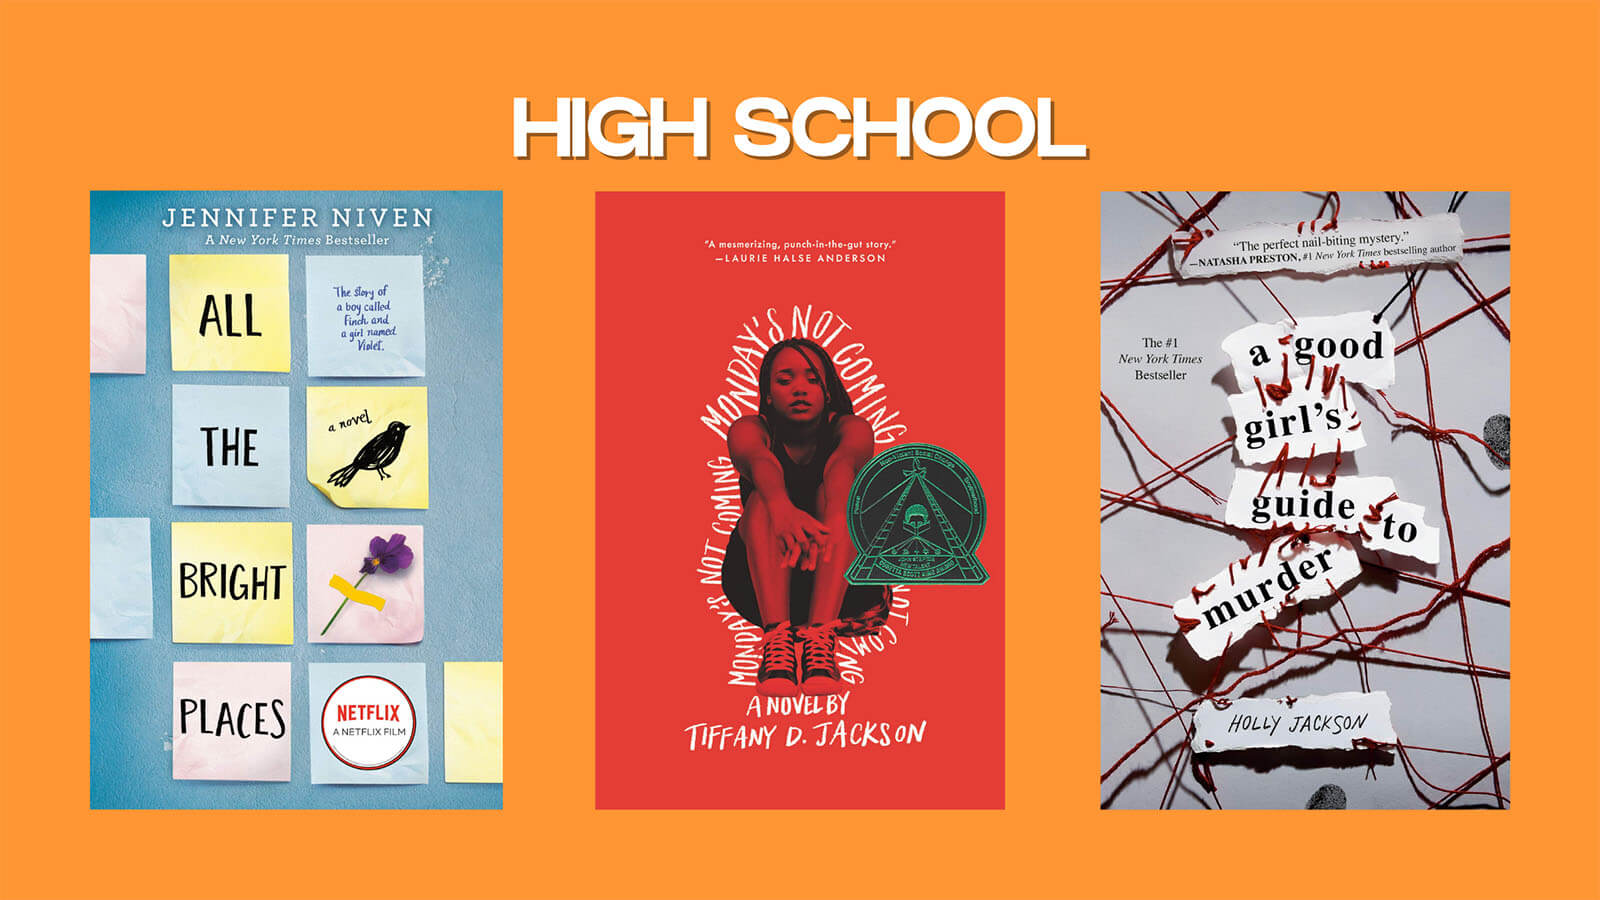 Book covers of All the Bright Places by Jennifer Niven, Monday's Not Coming by Tiffany D. Jackson, and A Good Girl's Guide to Murder by Holly Jackson.